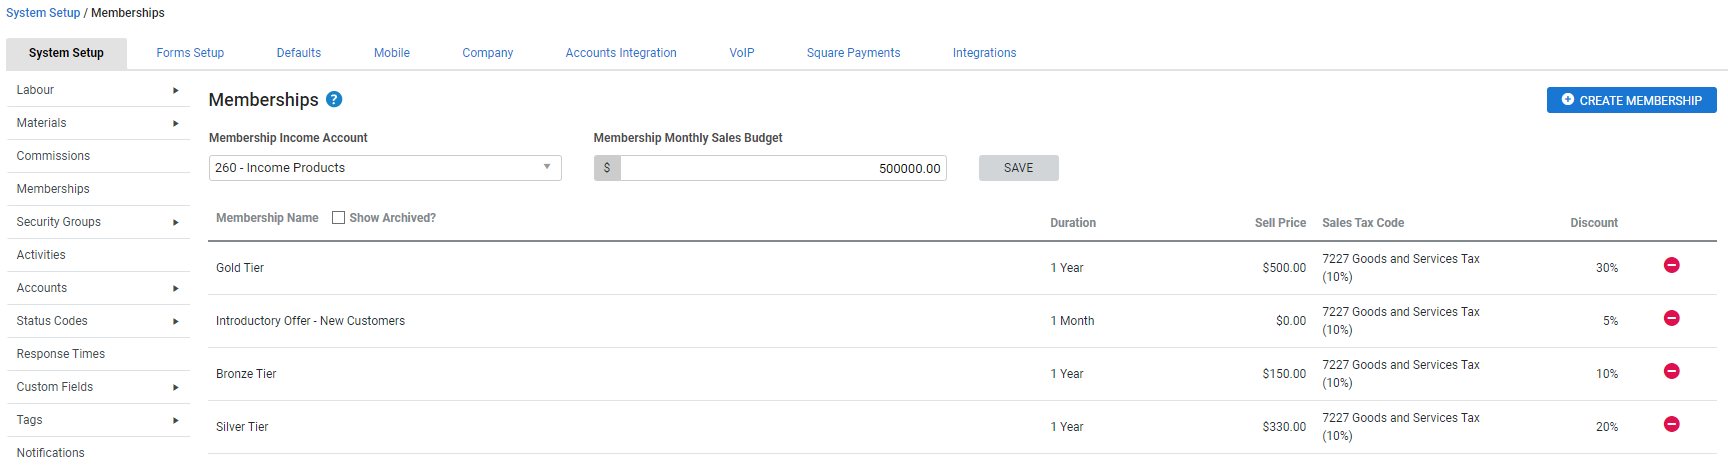 A screenshot of the Membership cost centre income account field in System Setup.